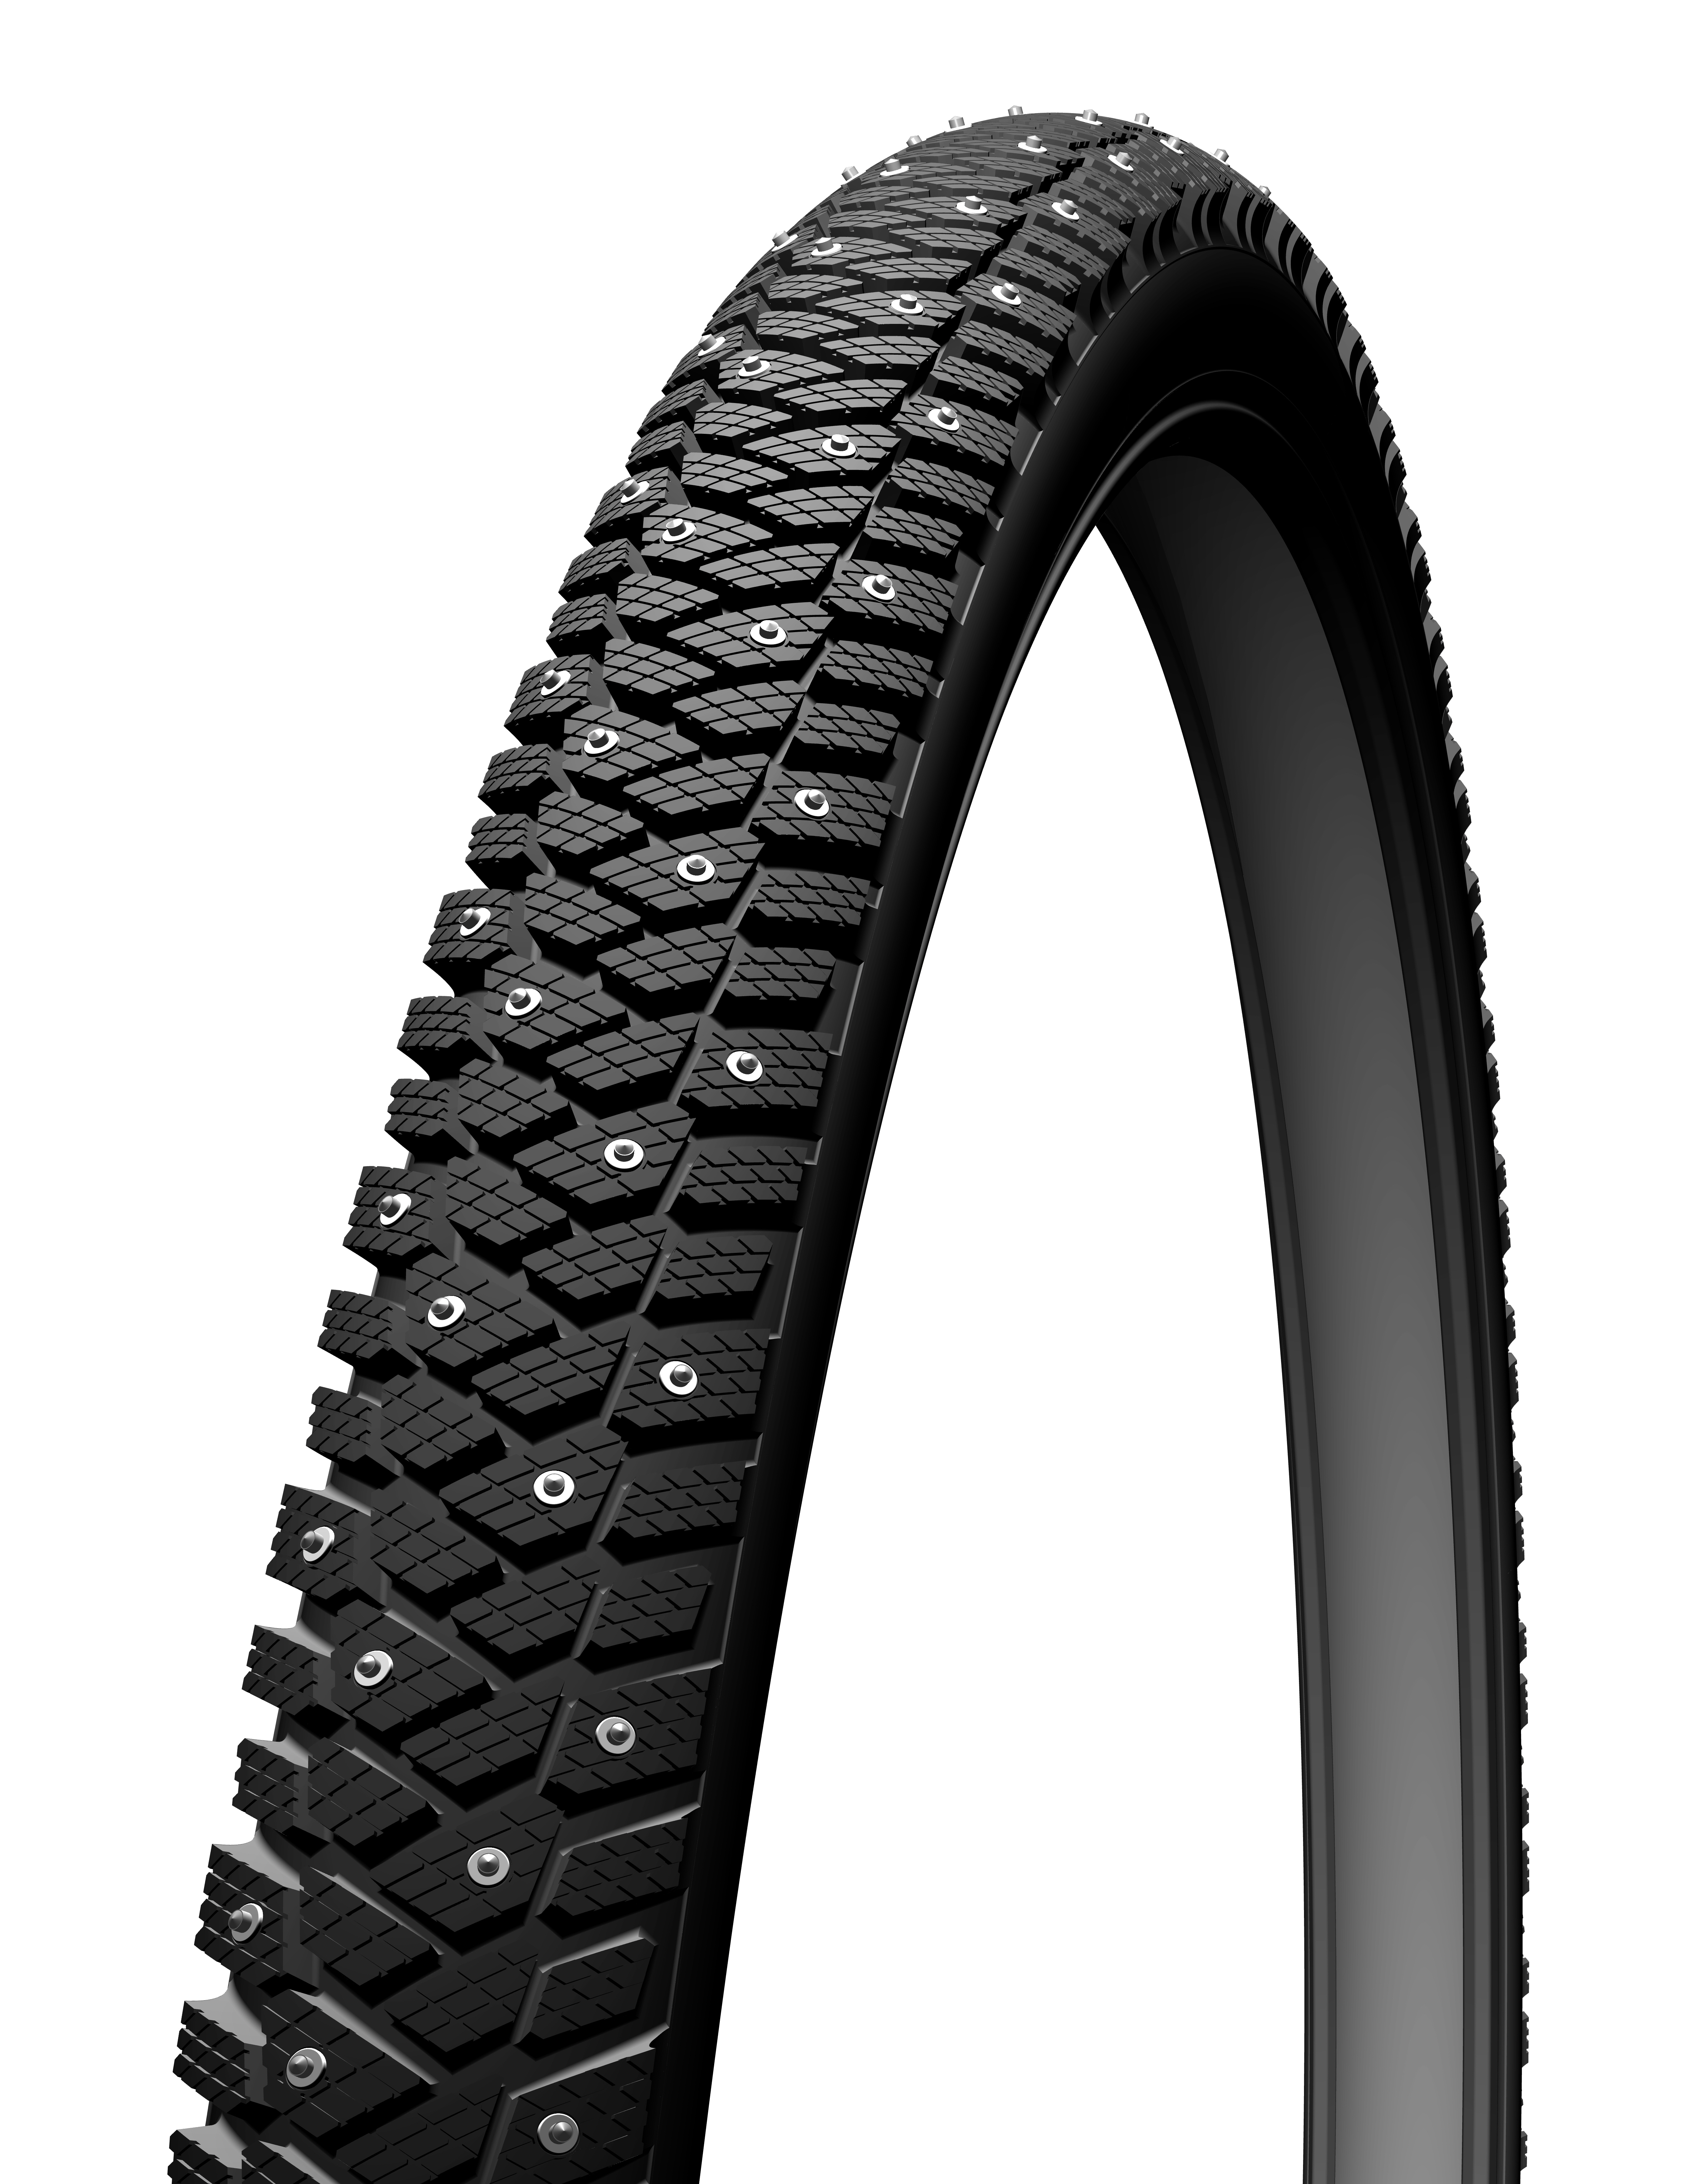 Suomi Tyres Routa W212 TLR, 47-507